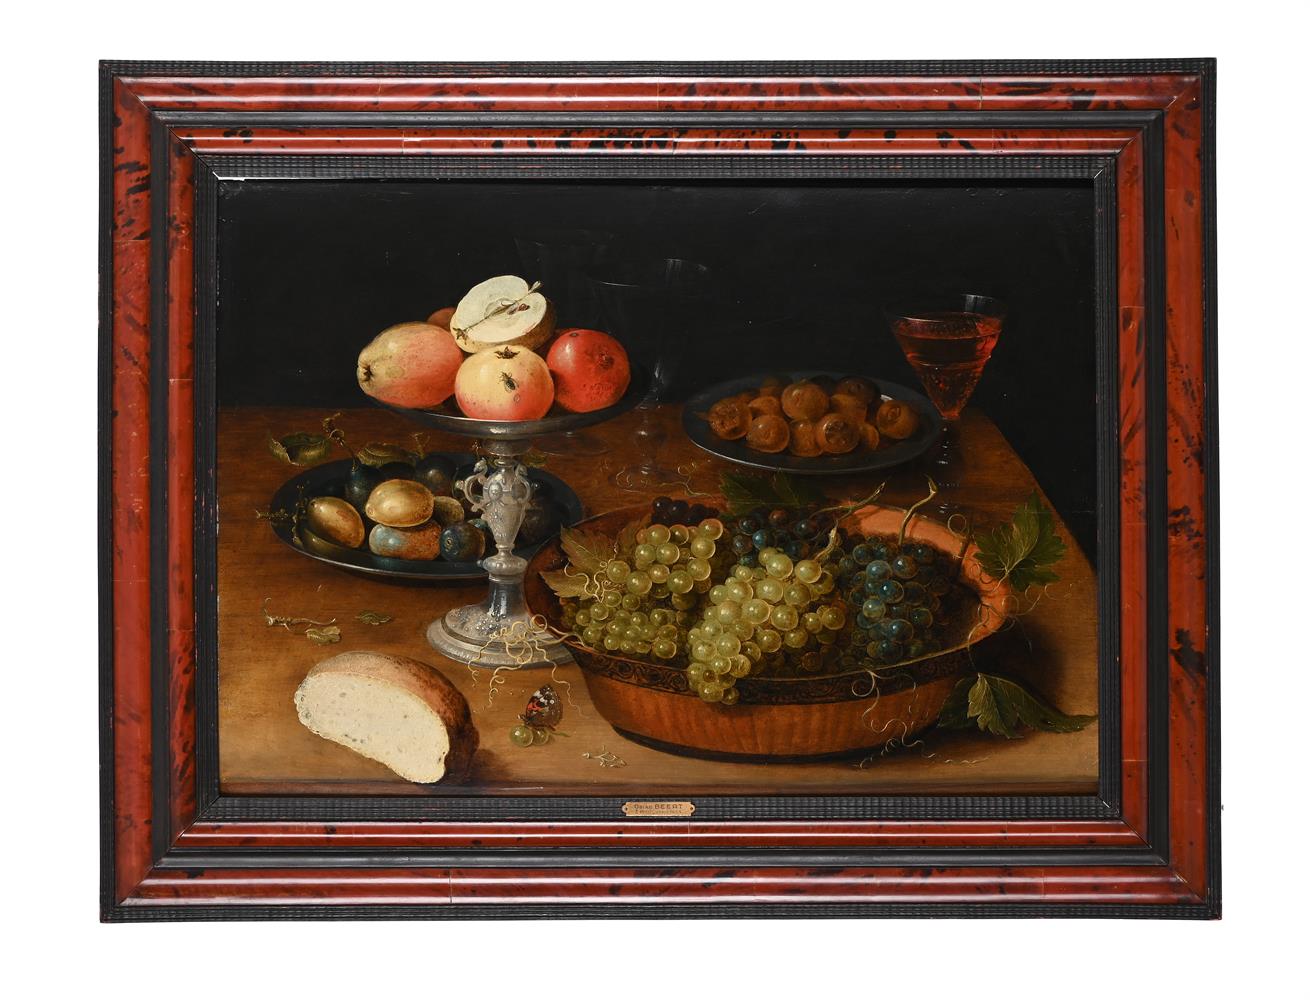 OSIAS BEERT THE ELDER (BELGIAN CIRCA 1570-1624), STILL LIFE OF GRAPES IN A DISH - Image 2 of 3